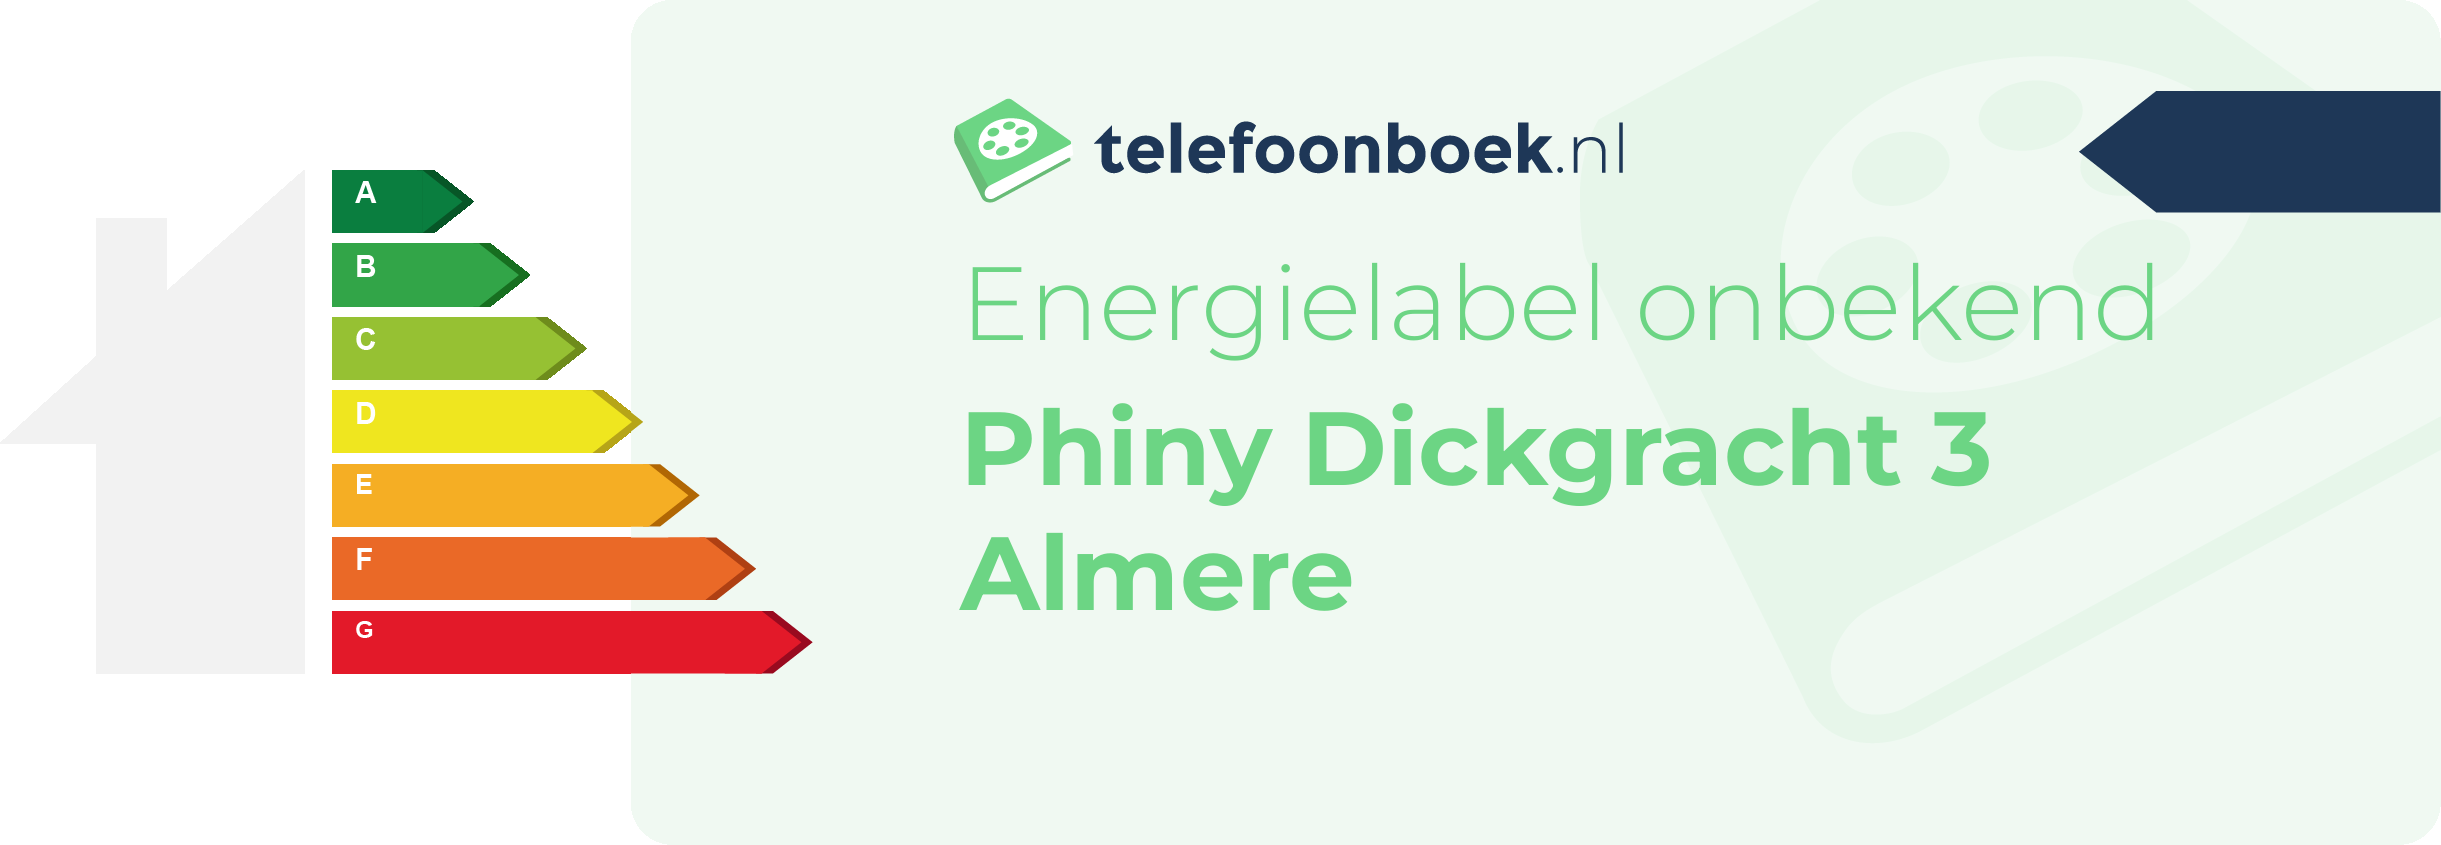 Energielabel Phiny Dickgracht 3 Almere